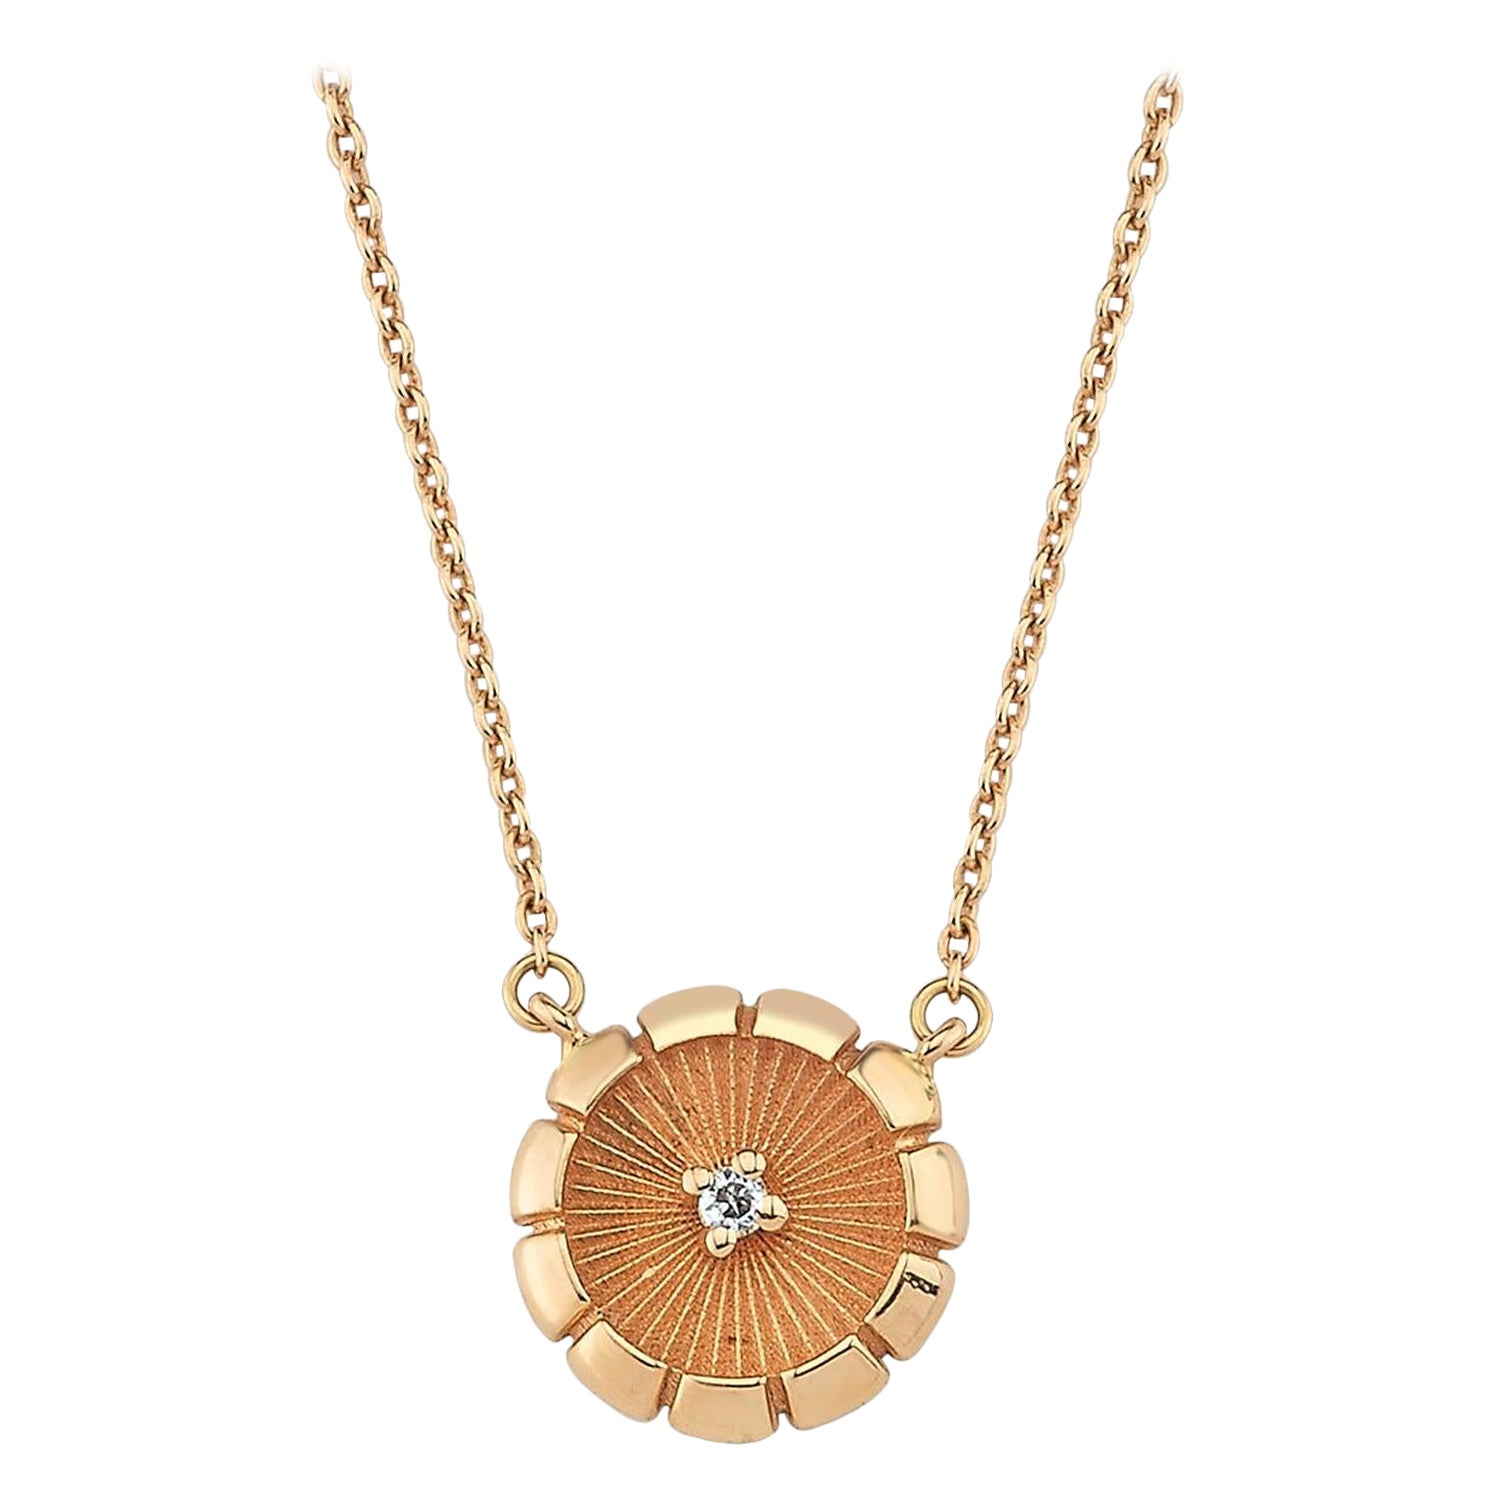 Kashchei Medallion Small Necklace in 14K Rose Gold by Selda Jewellery